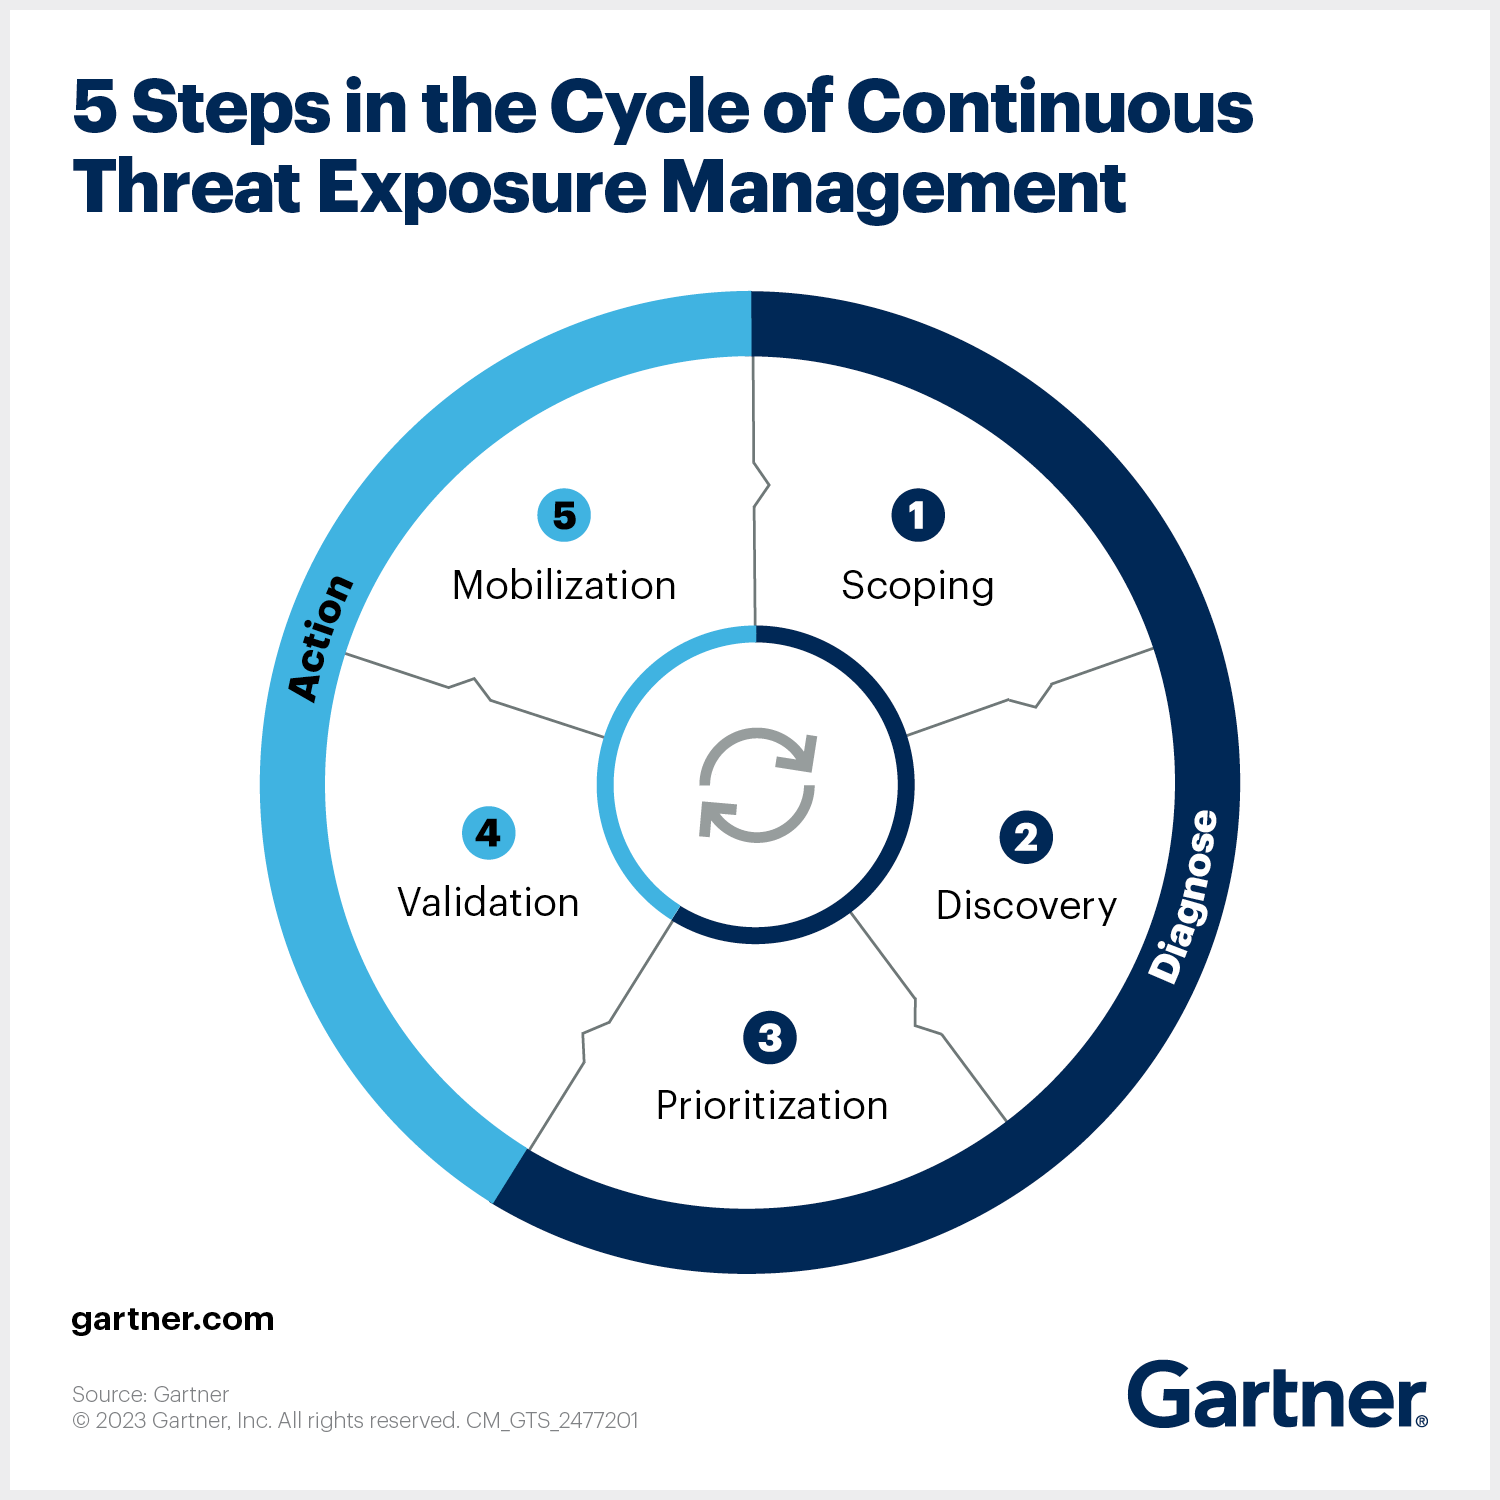  Gartner's 5 steps in the cycle of continous threat-exposure management